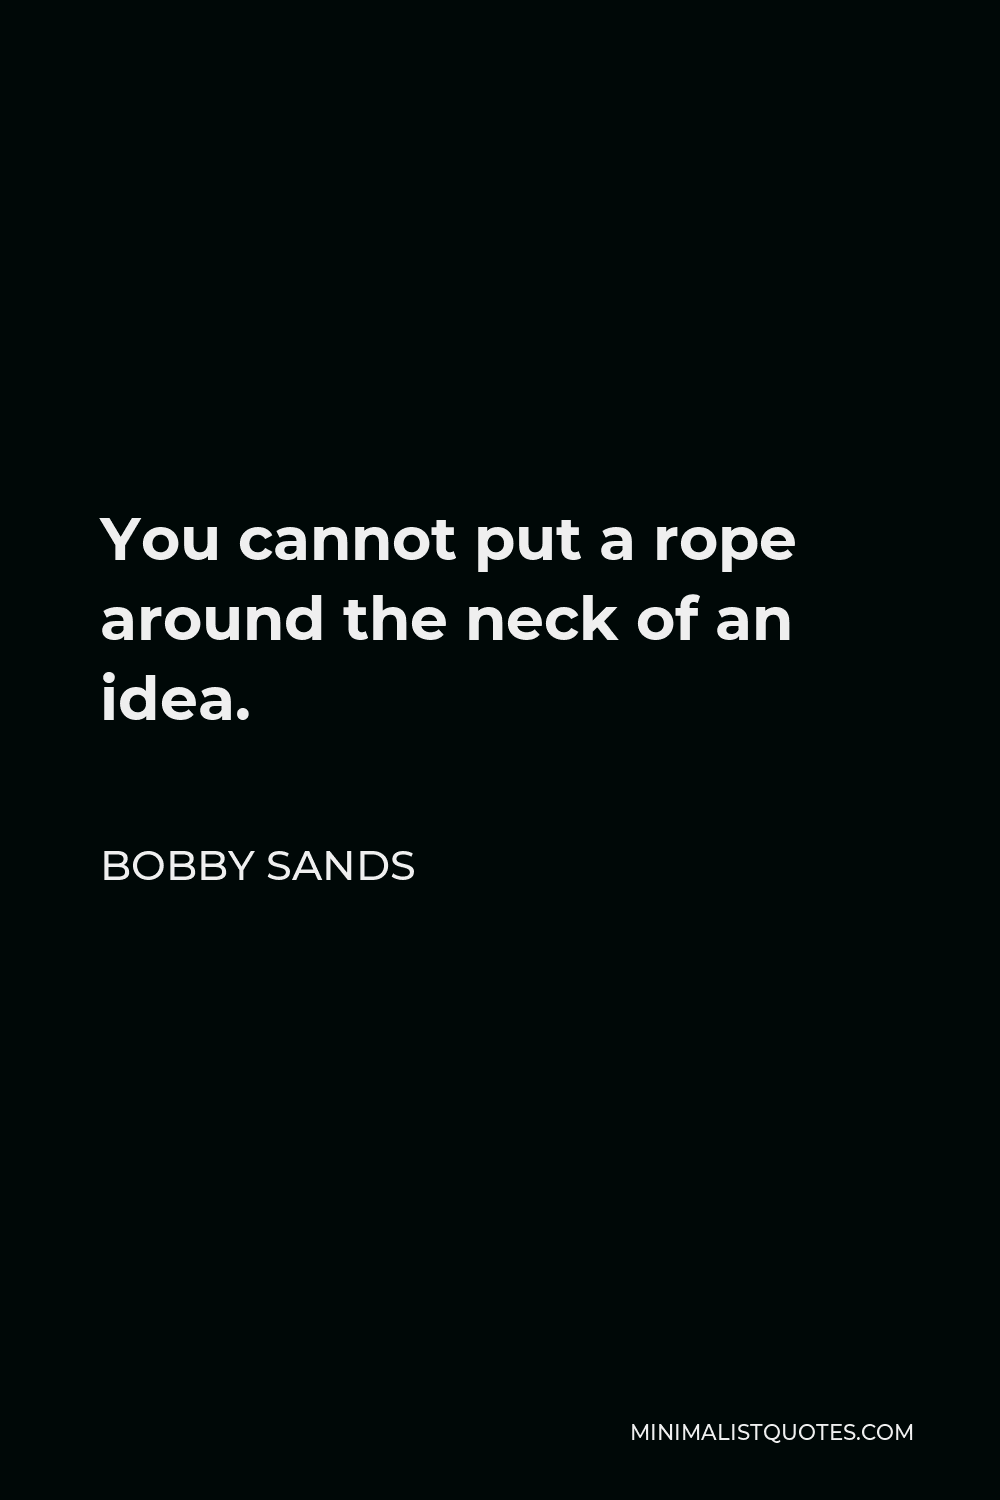 Bobby Sands Quote - You cannot put a rope around the neck of an idea.